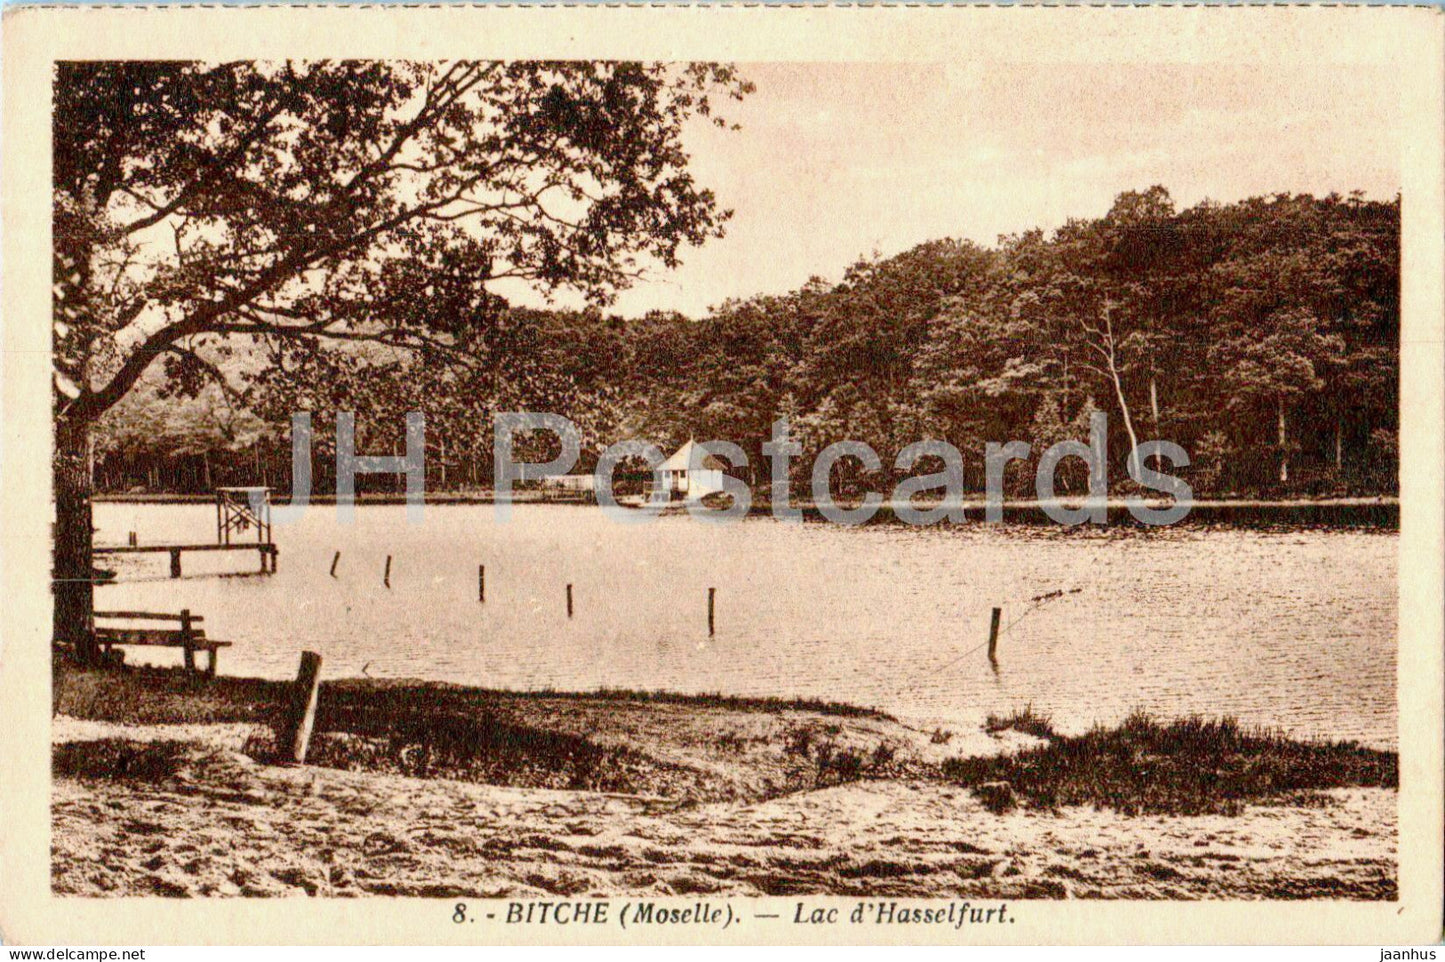 Bitche - Lac d'Hasselfurt - 8 - old postcard - France - used - JH Postcards